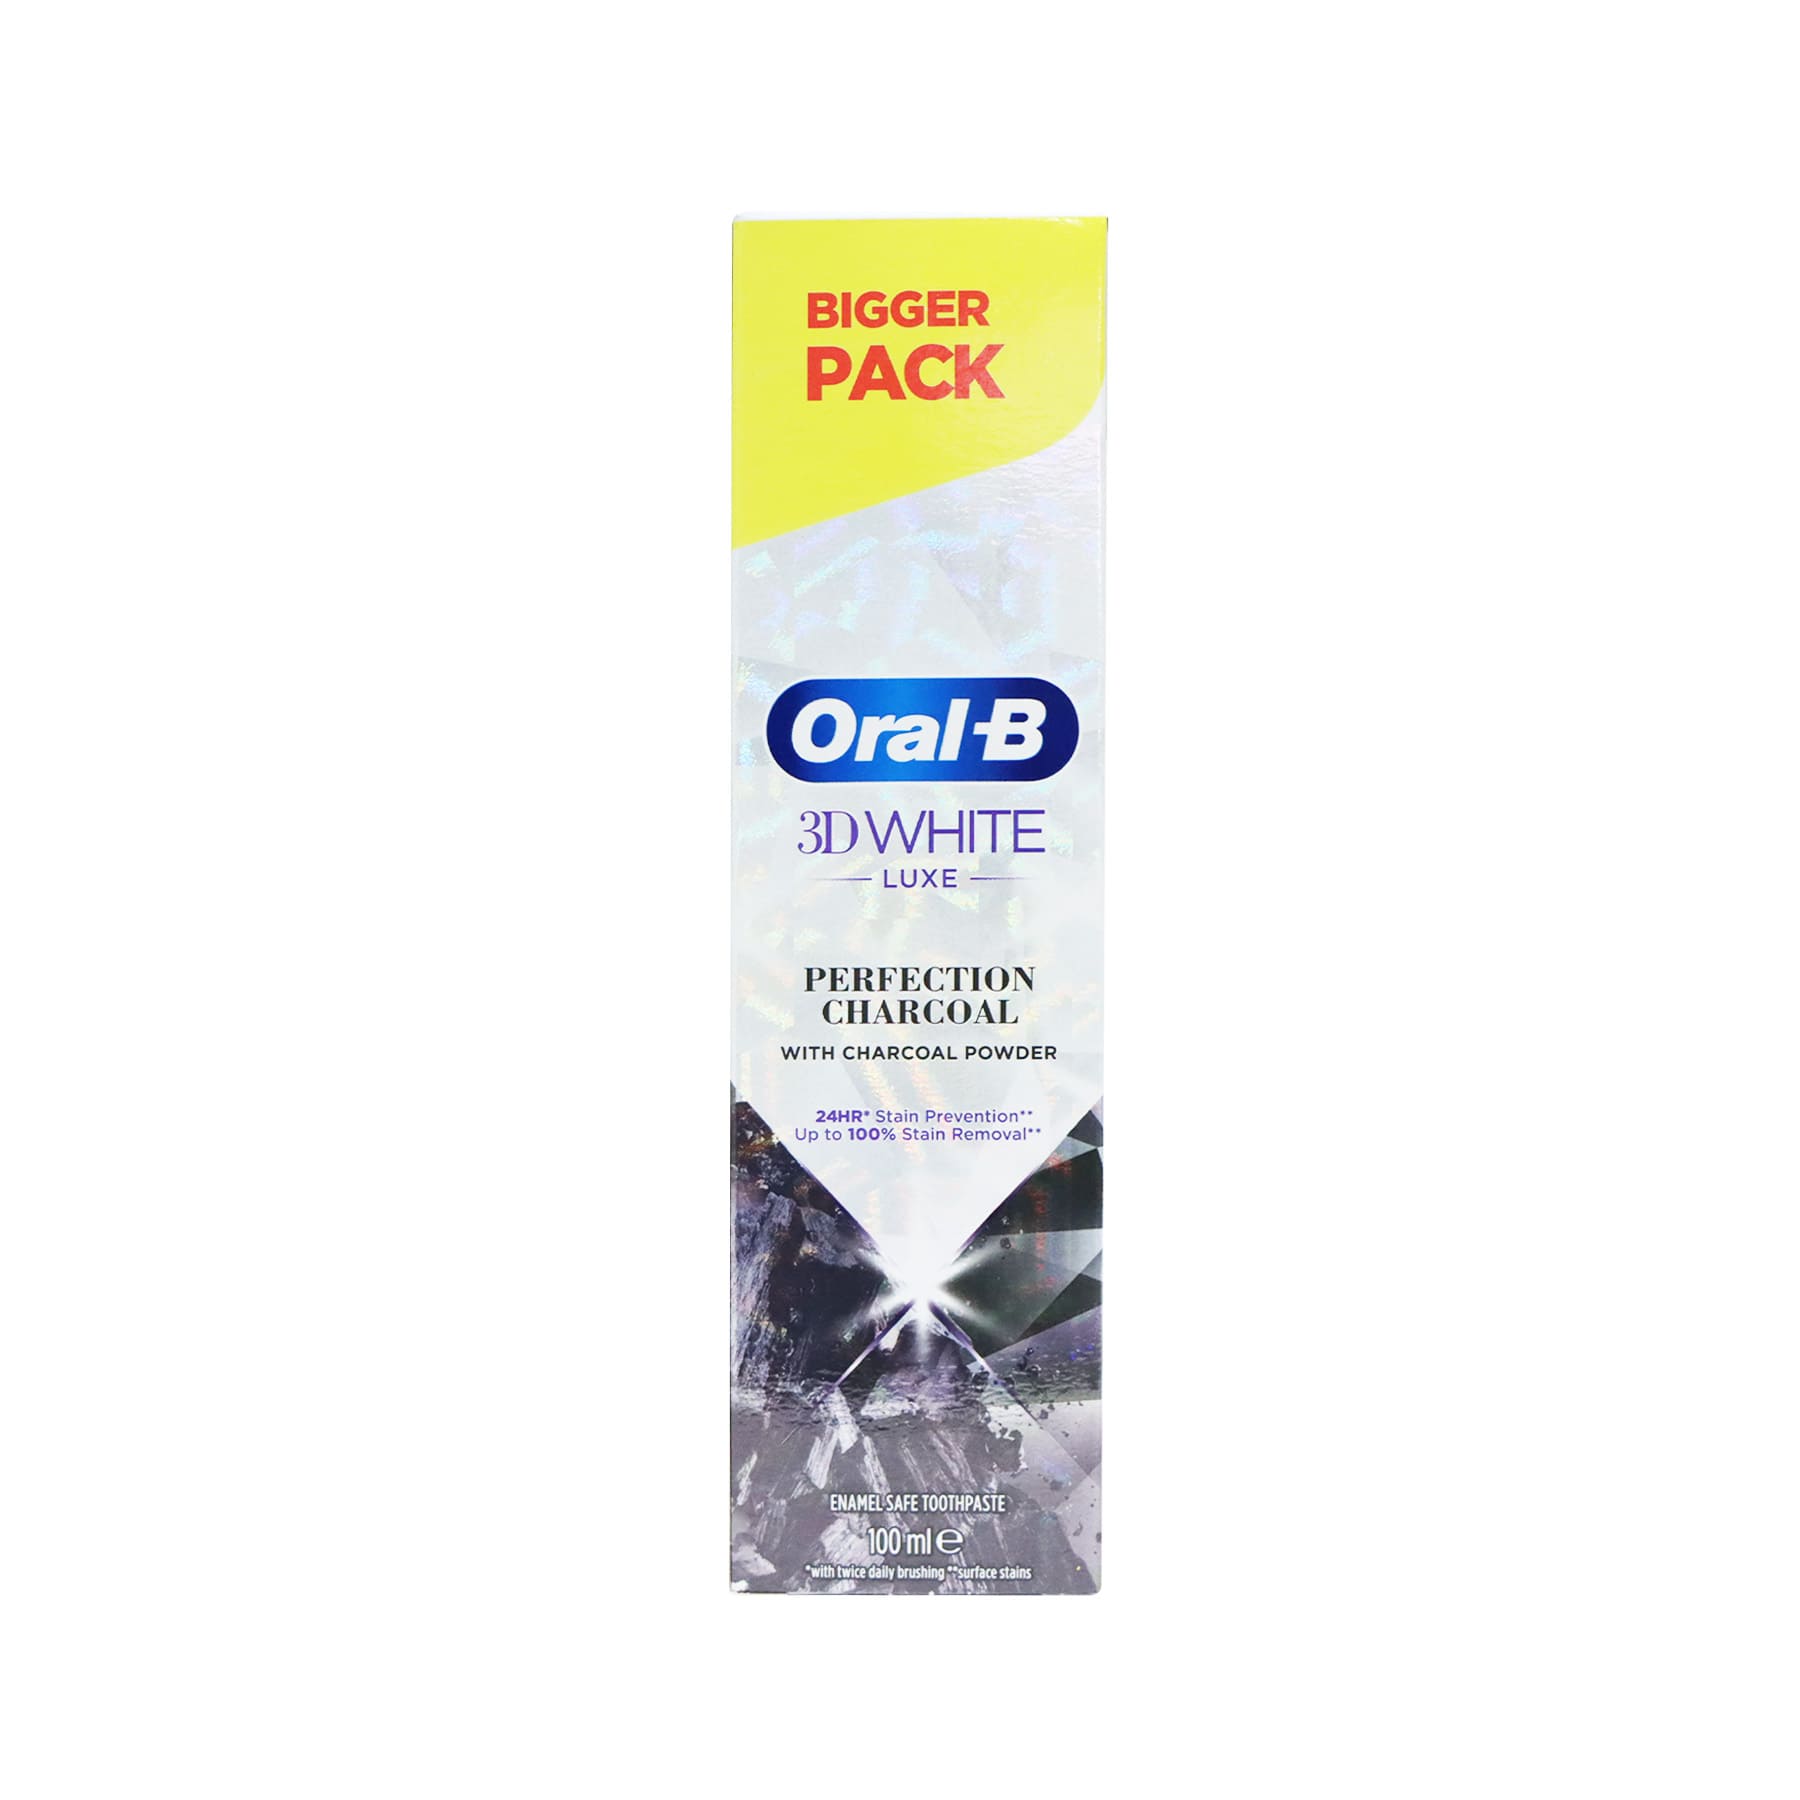 Oral-B 3D White Luxe Perfection Charcoal Toothpaste 100ml x 2